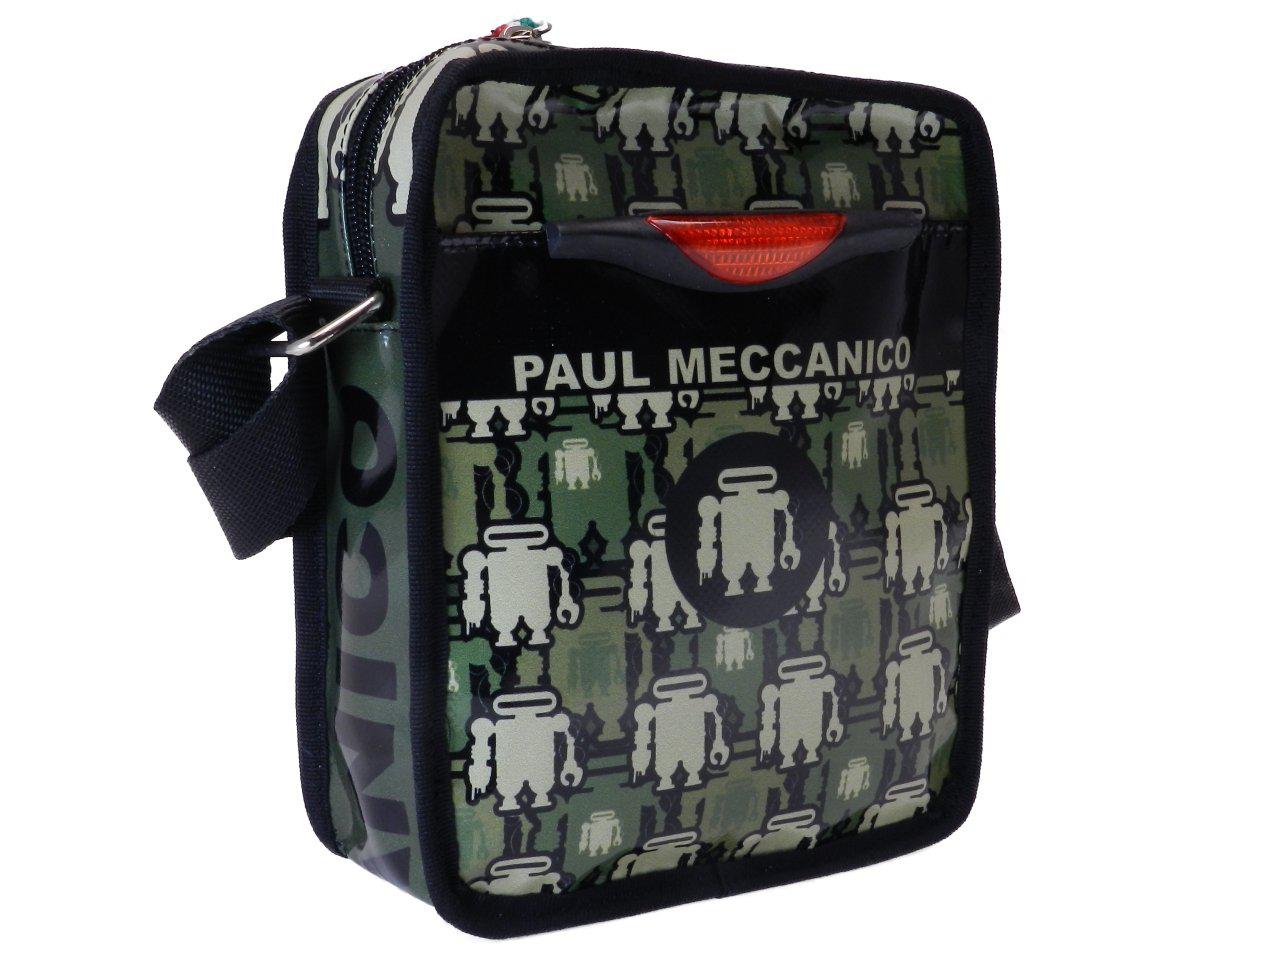 SHOULDER BAG DARK GREEN WITH PAUL MECCANICO'S ROBOTS. STRATOS MODEL MADE OF LORRY TARPAULIN. - Limited Edition Paul Meccanico